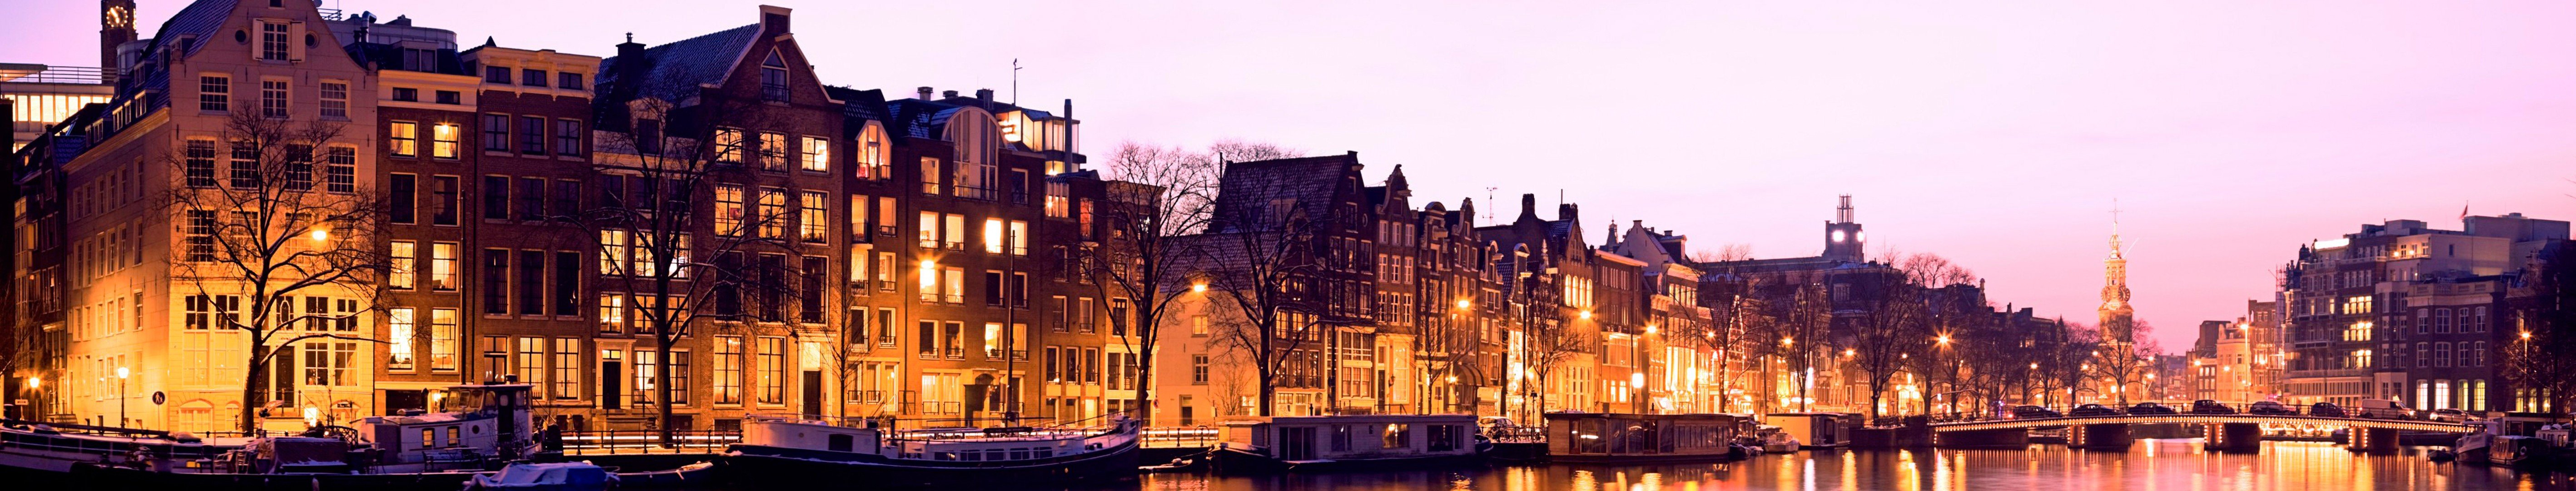 canal, Street, City, Lights, Evening, House, Trees, Boat, Tower, Holland, Netherlands, Panorama, Europe Wallpaper